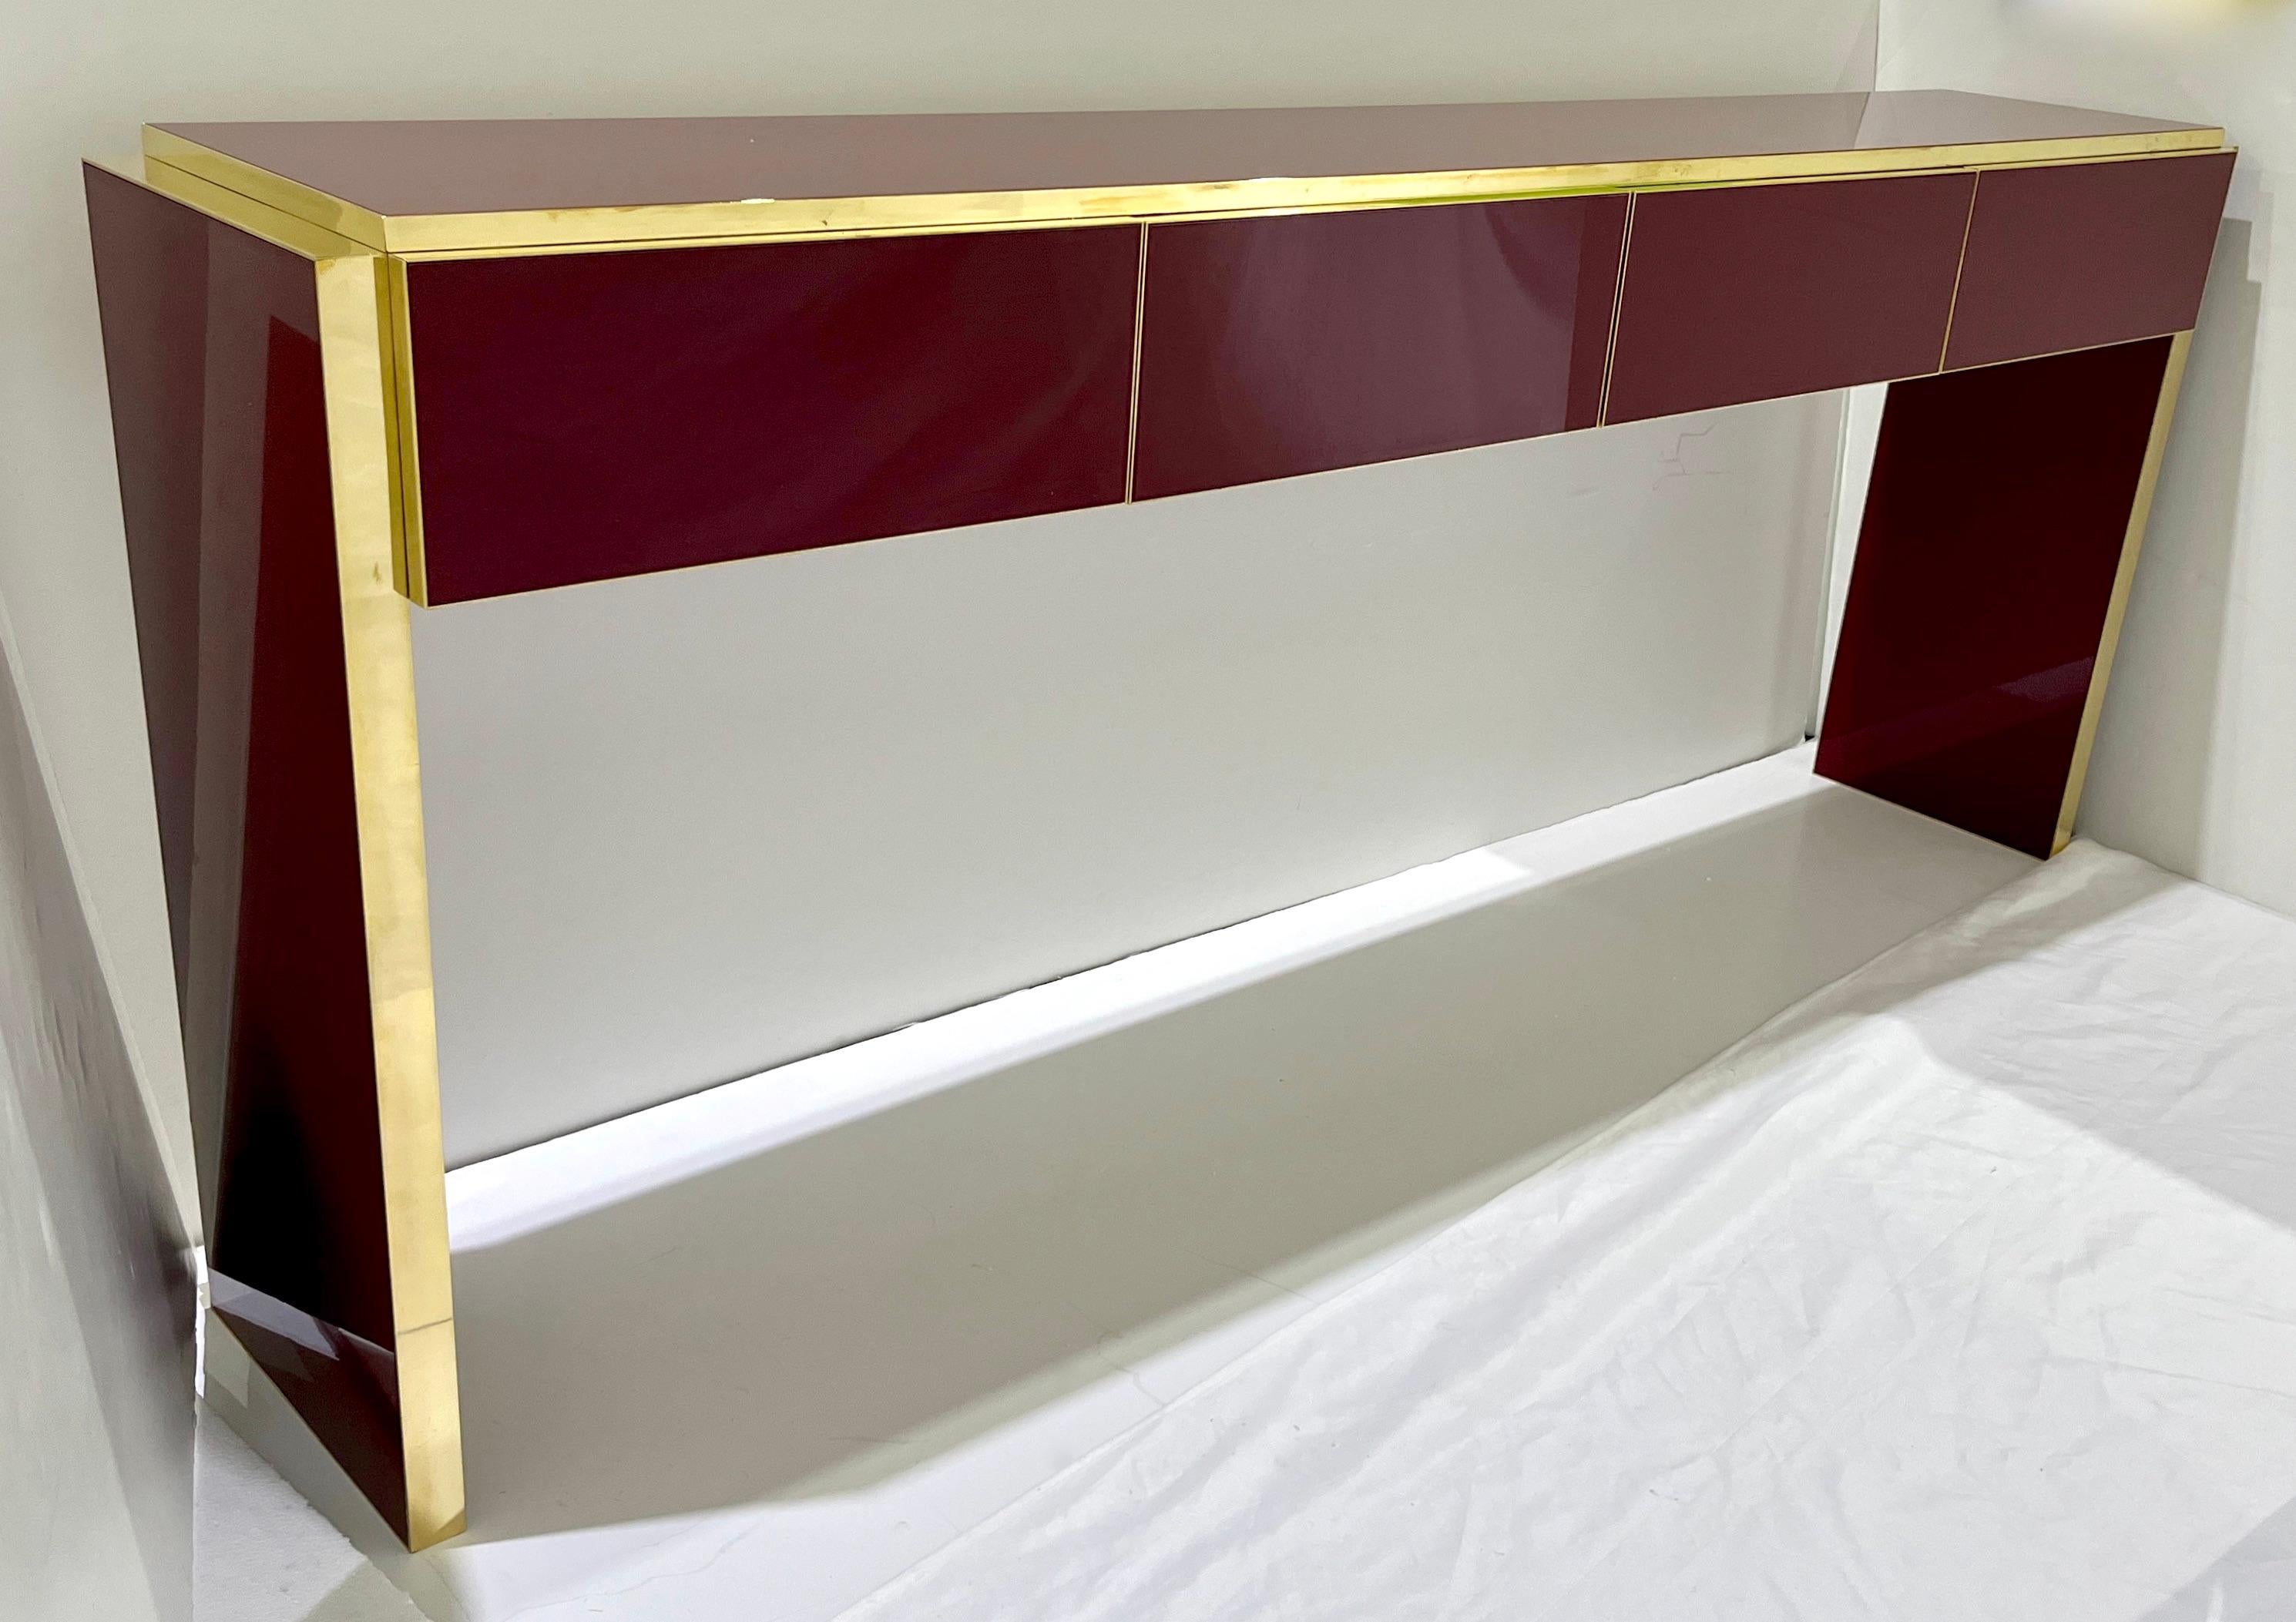 Contemporary Bespoke customizable 4-drawer long modern console / sideboard, entirely Hand Made in Italy, with a minimalist Art Deco Design, the surround is decorated with art glass in a striking wine burgundy color. This console of a modern sleek